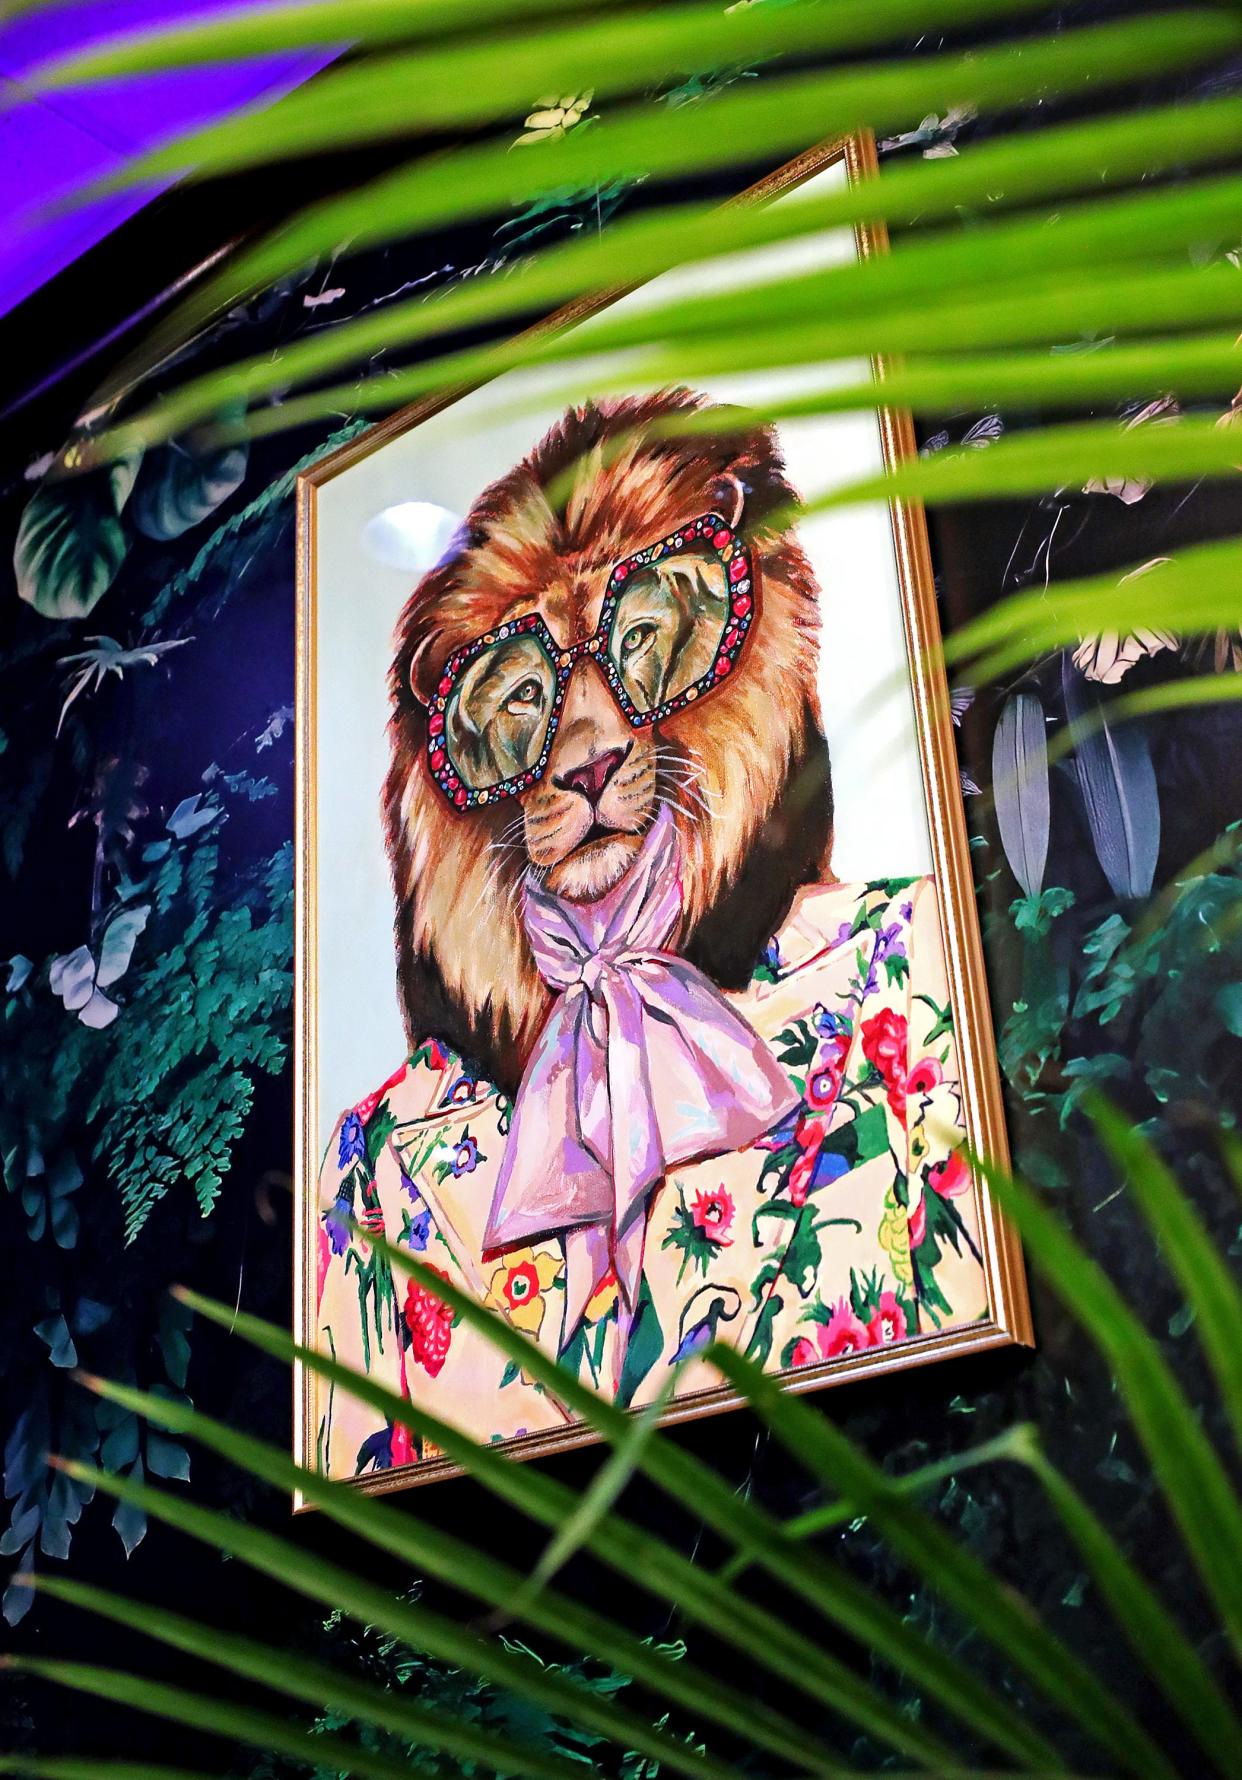 The new Square Scullery restaurant in North Hill has a unique atmosphere that the owner calls jungle disco with pictures of big cats and plants in every corner.